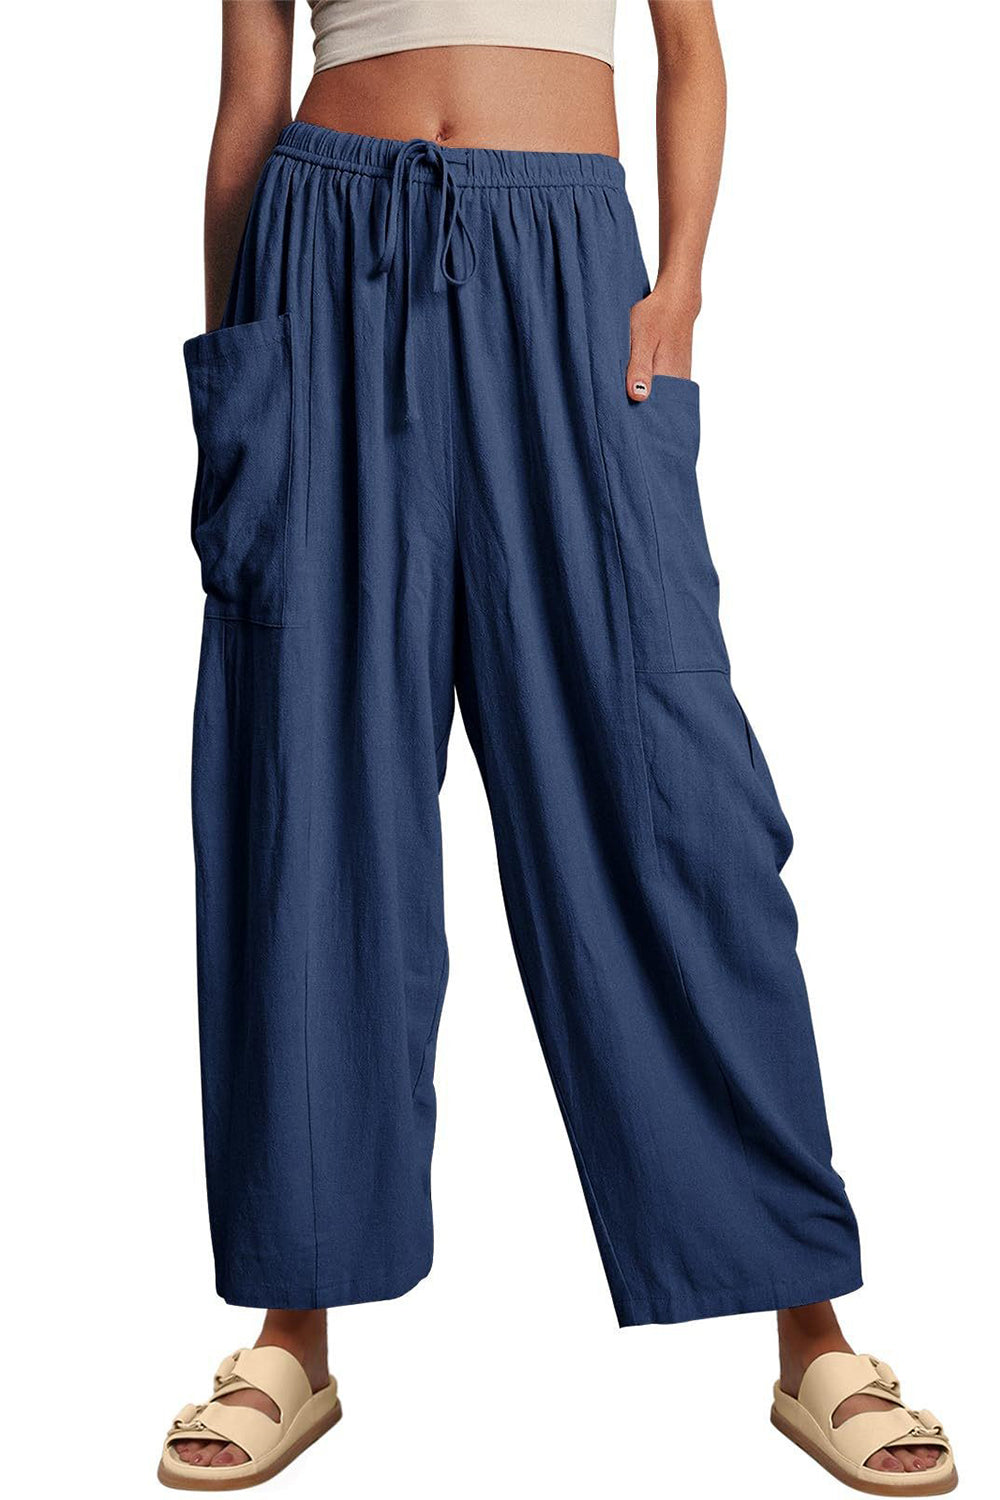 Pocketed Drawstring Wide Leg Pants - All Sizes